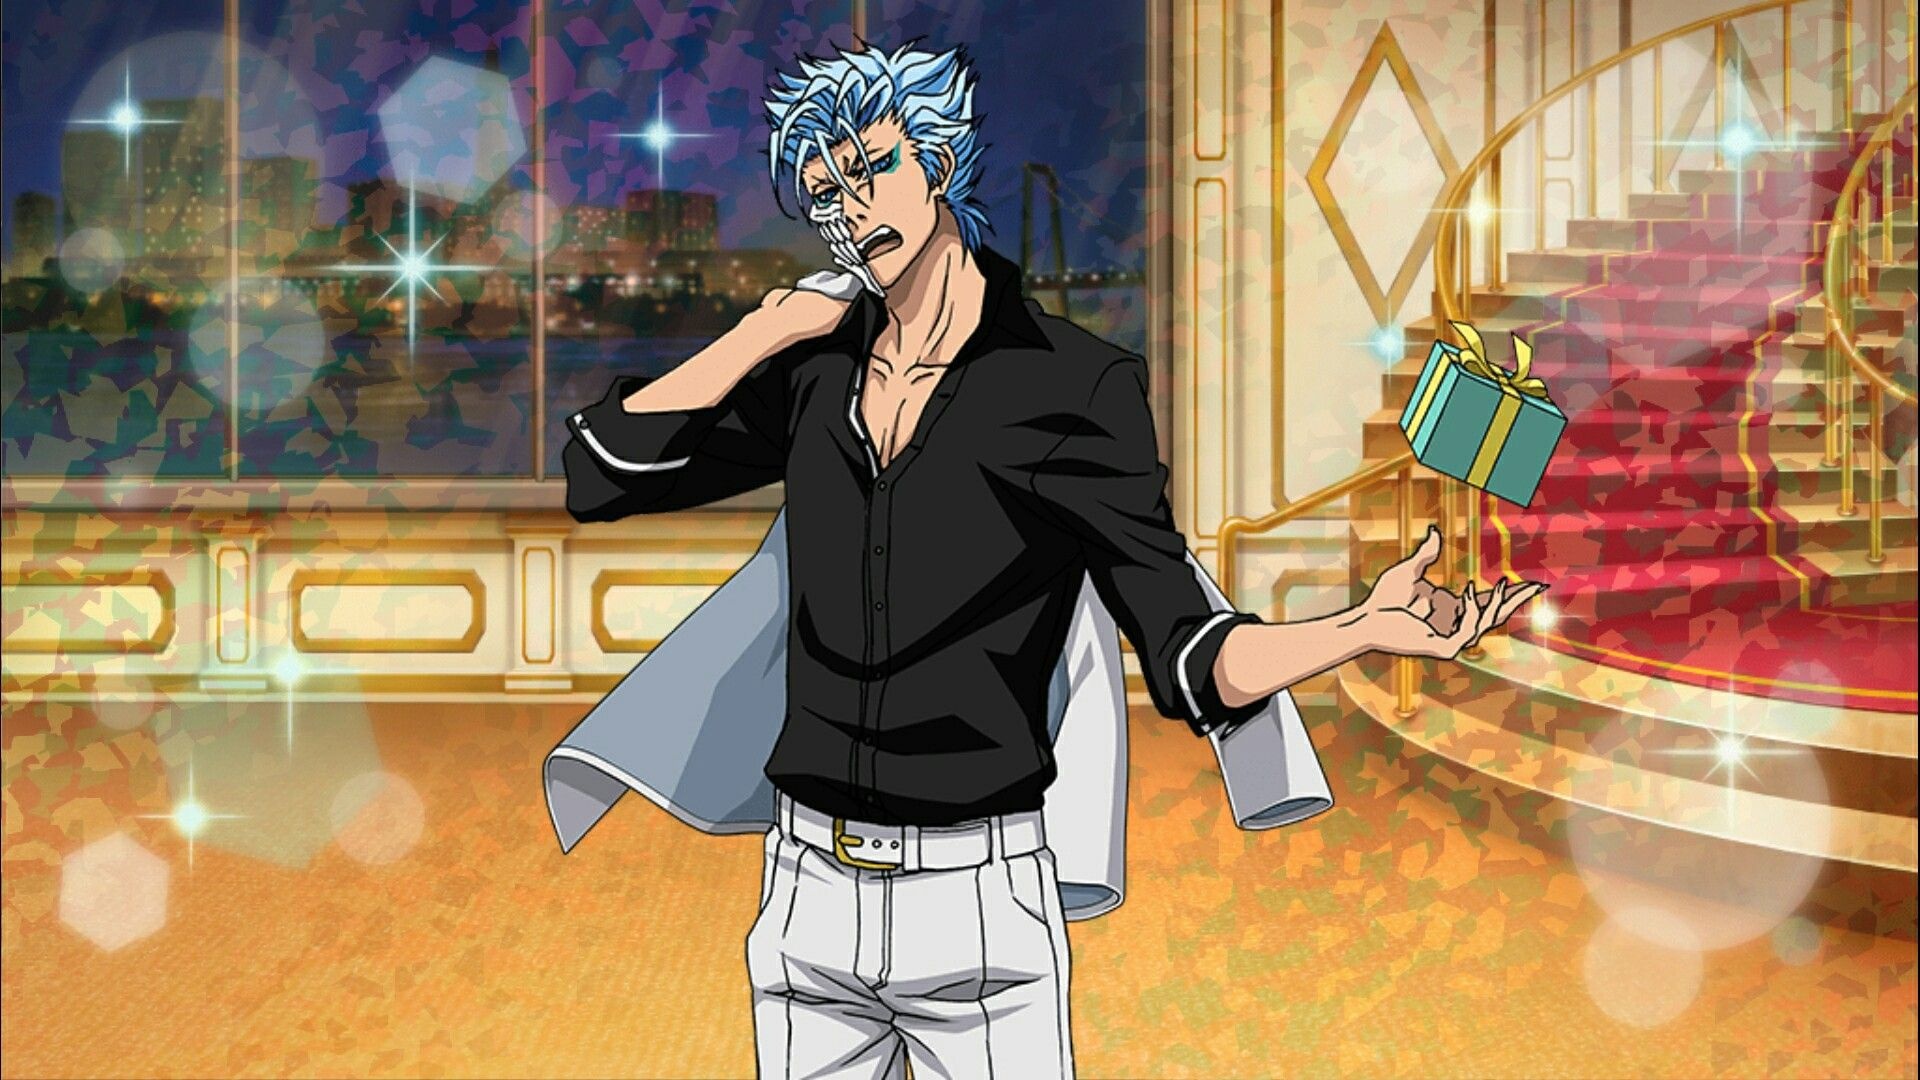 Grimmjow Jaggerjack: Bleach, A media franchise that includes an anime television series adaptation. 1920x1080 Full HD Background.